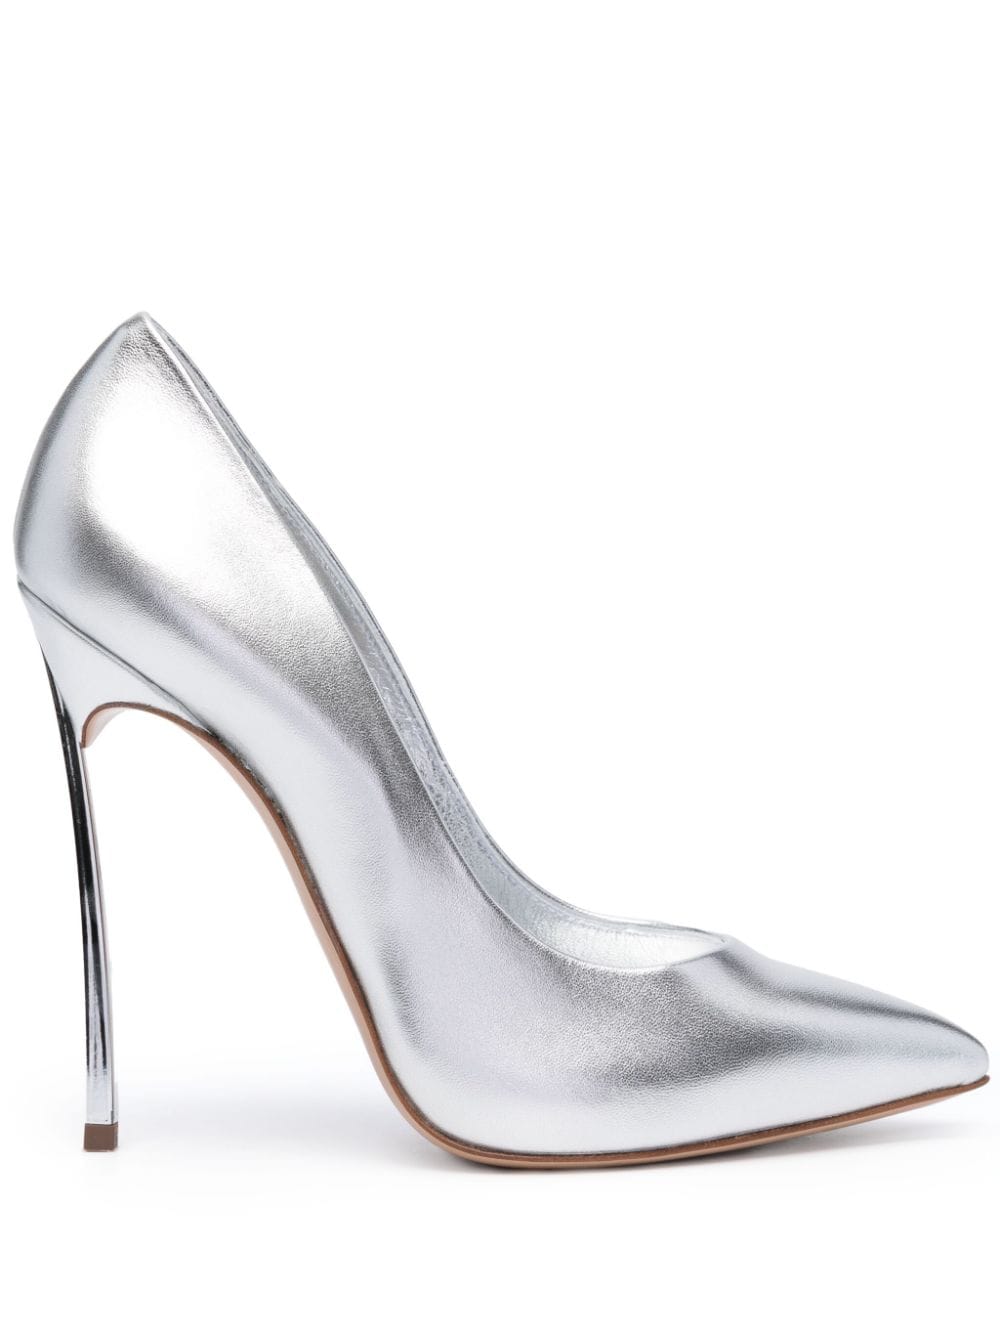 Casadei Blade Metallic Leather Pumps In Silver